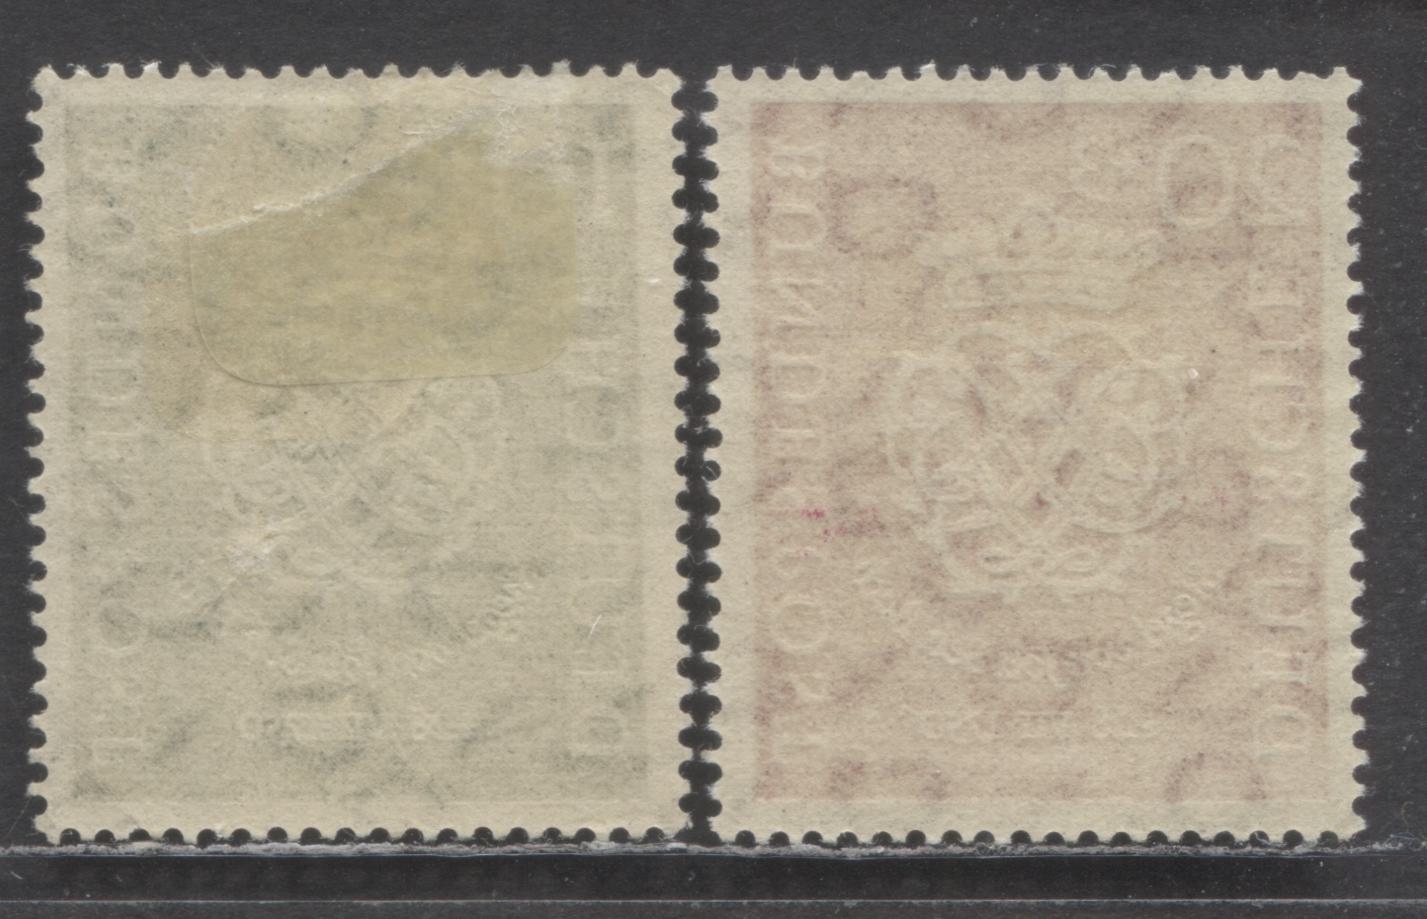 Lot 89 Germany Mi#121 (SC#B314)-122 (SC#B315) 1950 Centenary Of Bach's Death Semi Postals, 2 VFOG Singles, Click on Listing to See ALL Pictures, Estimated Value $48